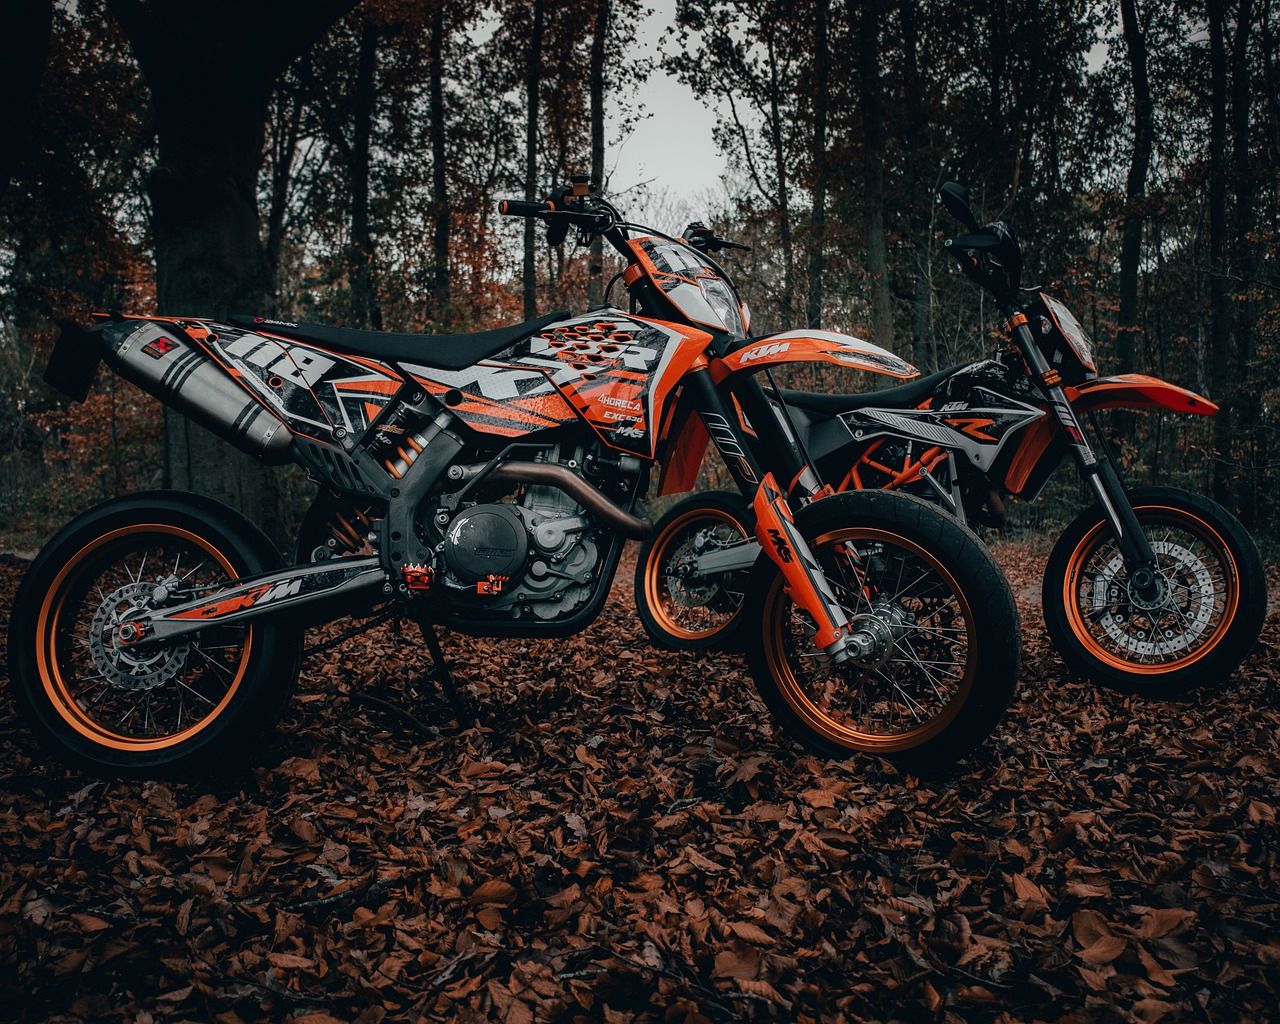 Ktm 500 Exc Wallpapers